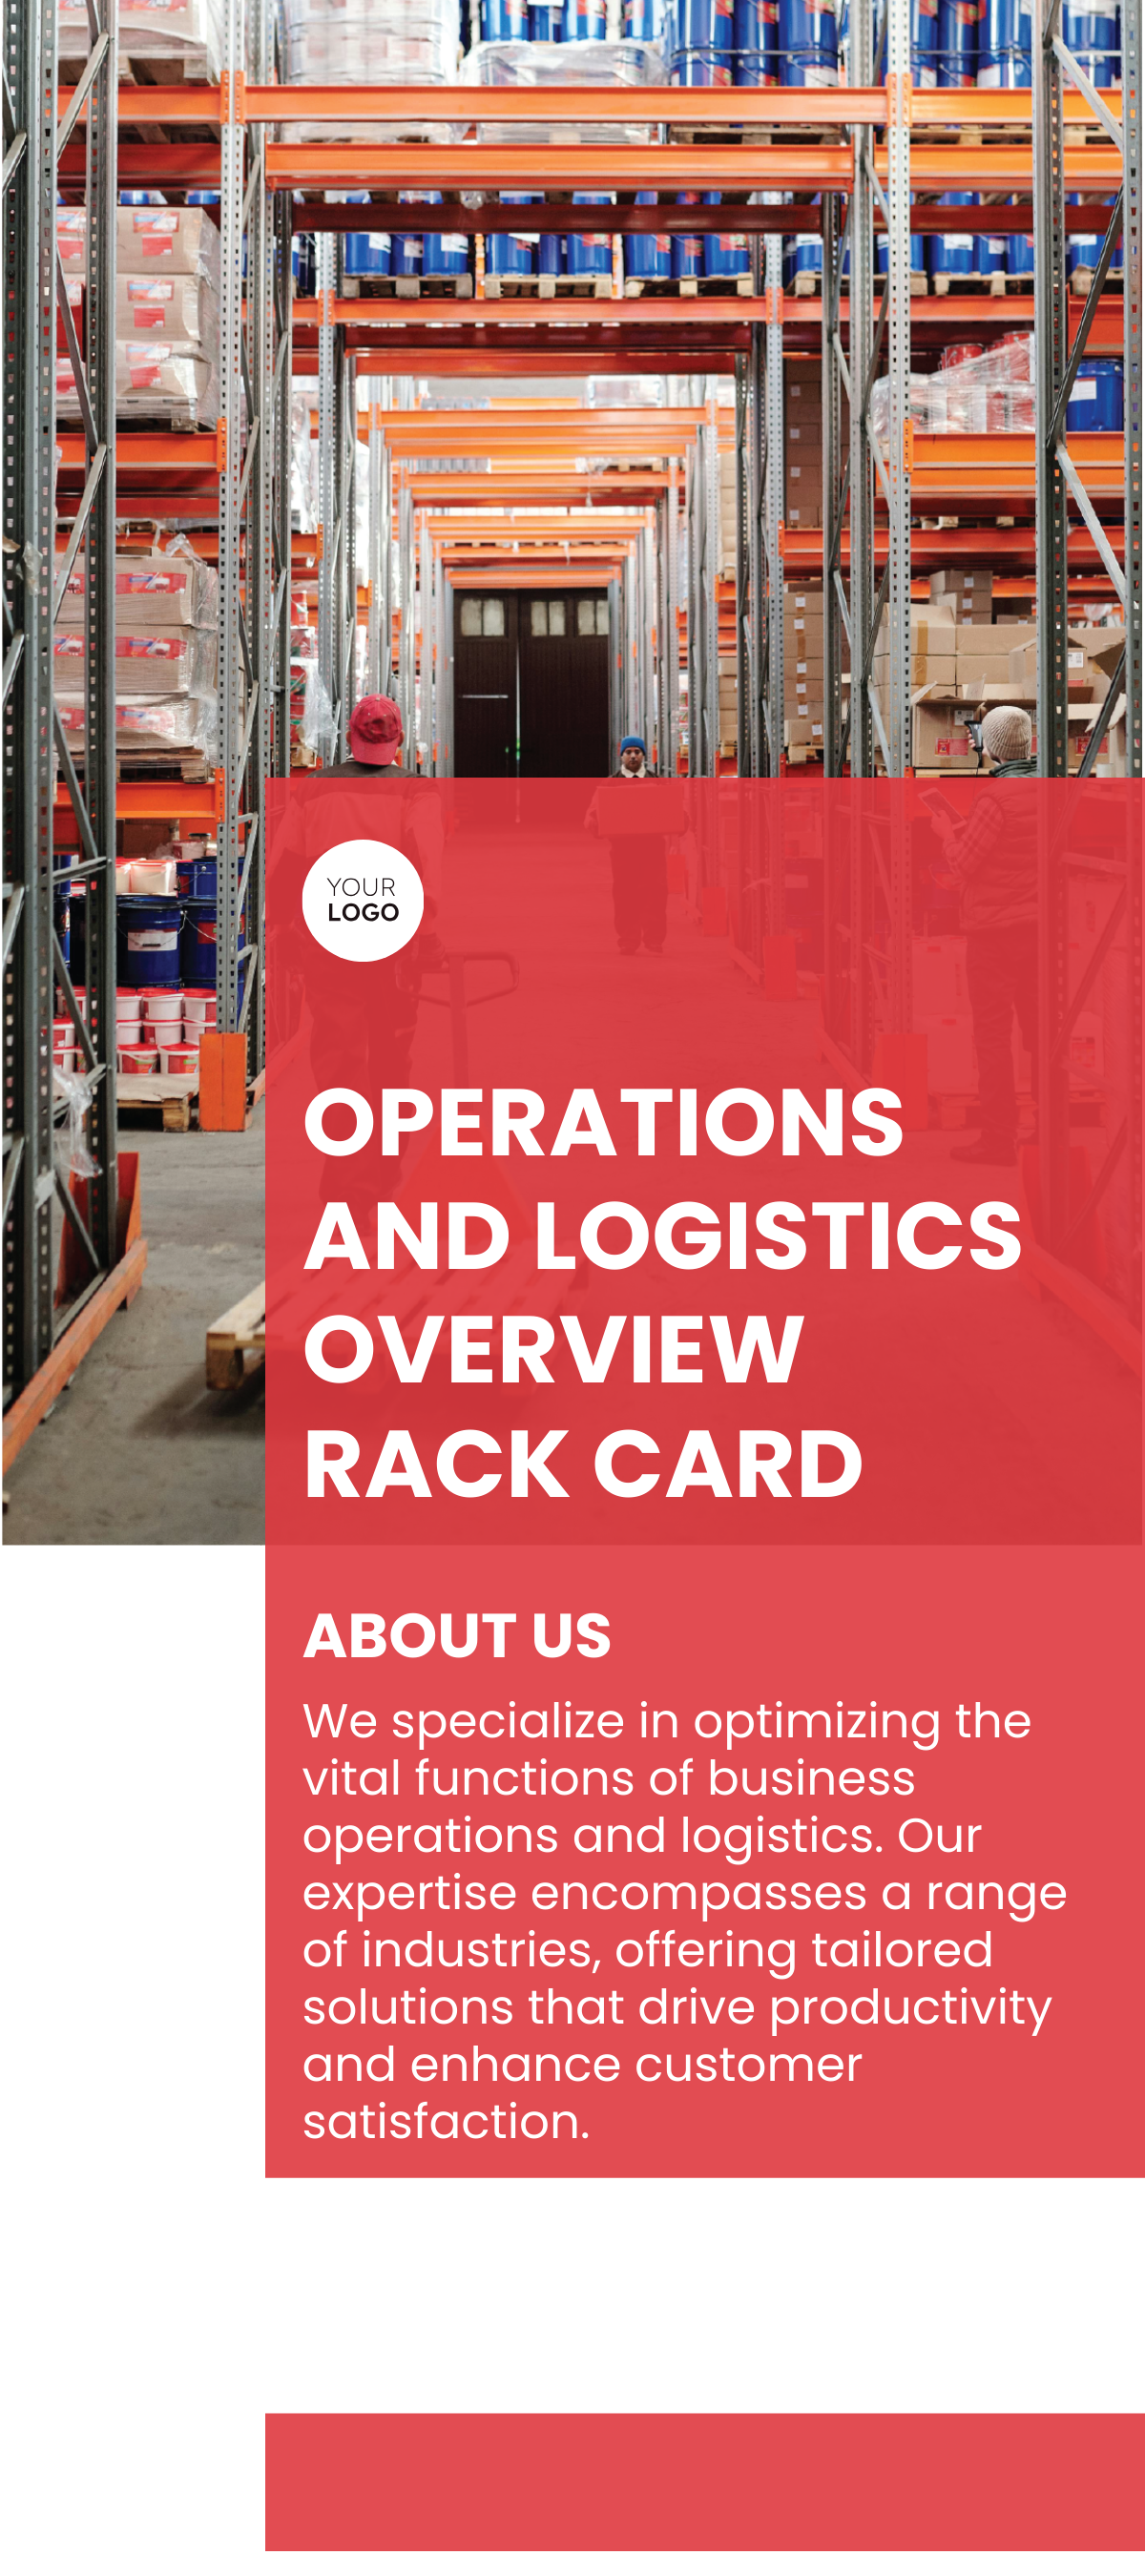 Operations and Logistics Overview Rack Card Template